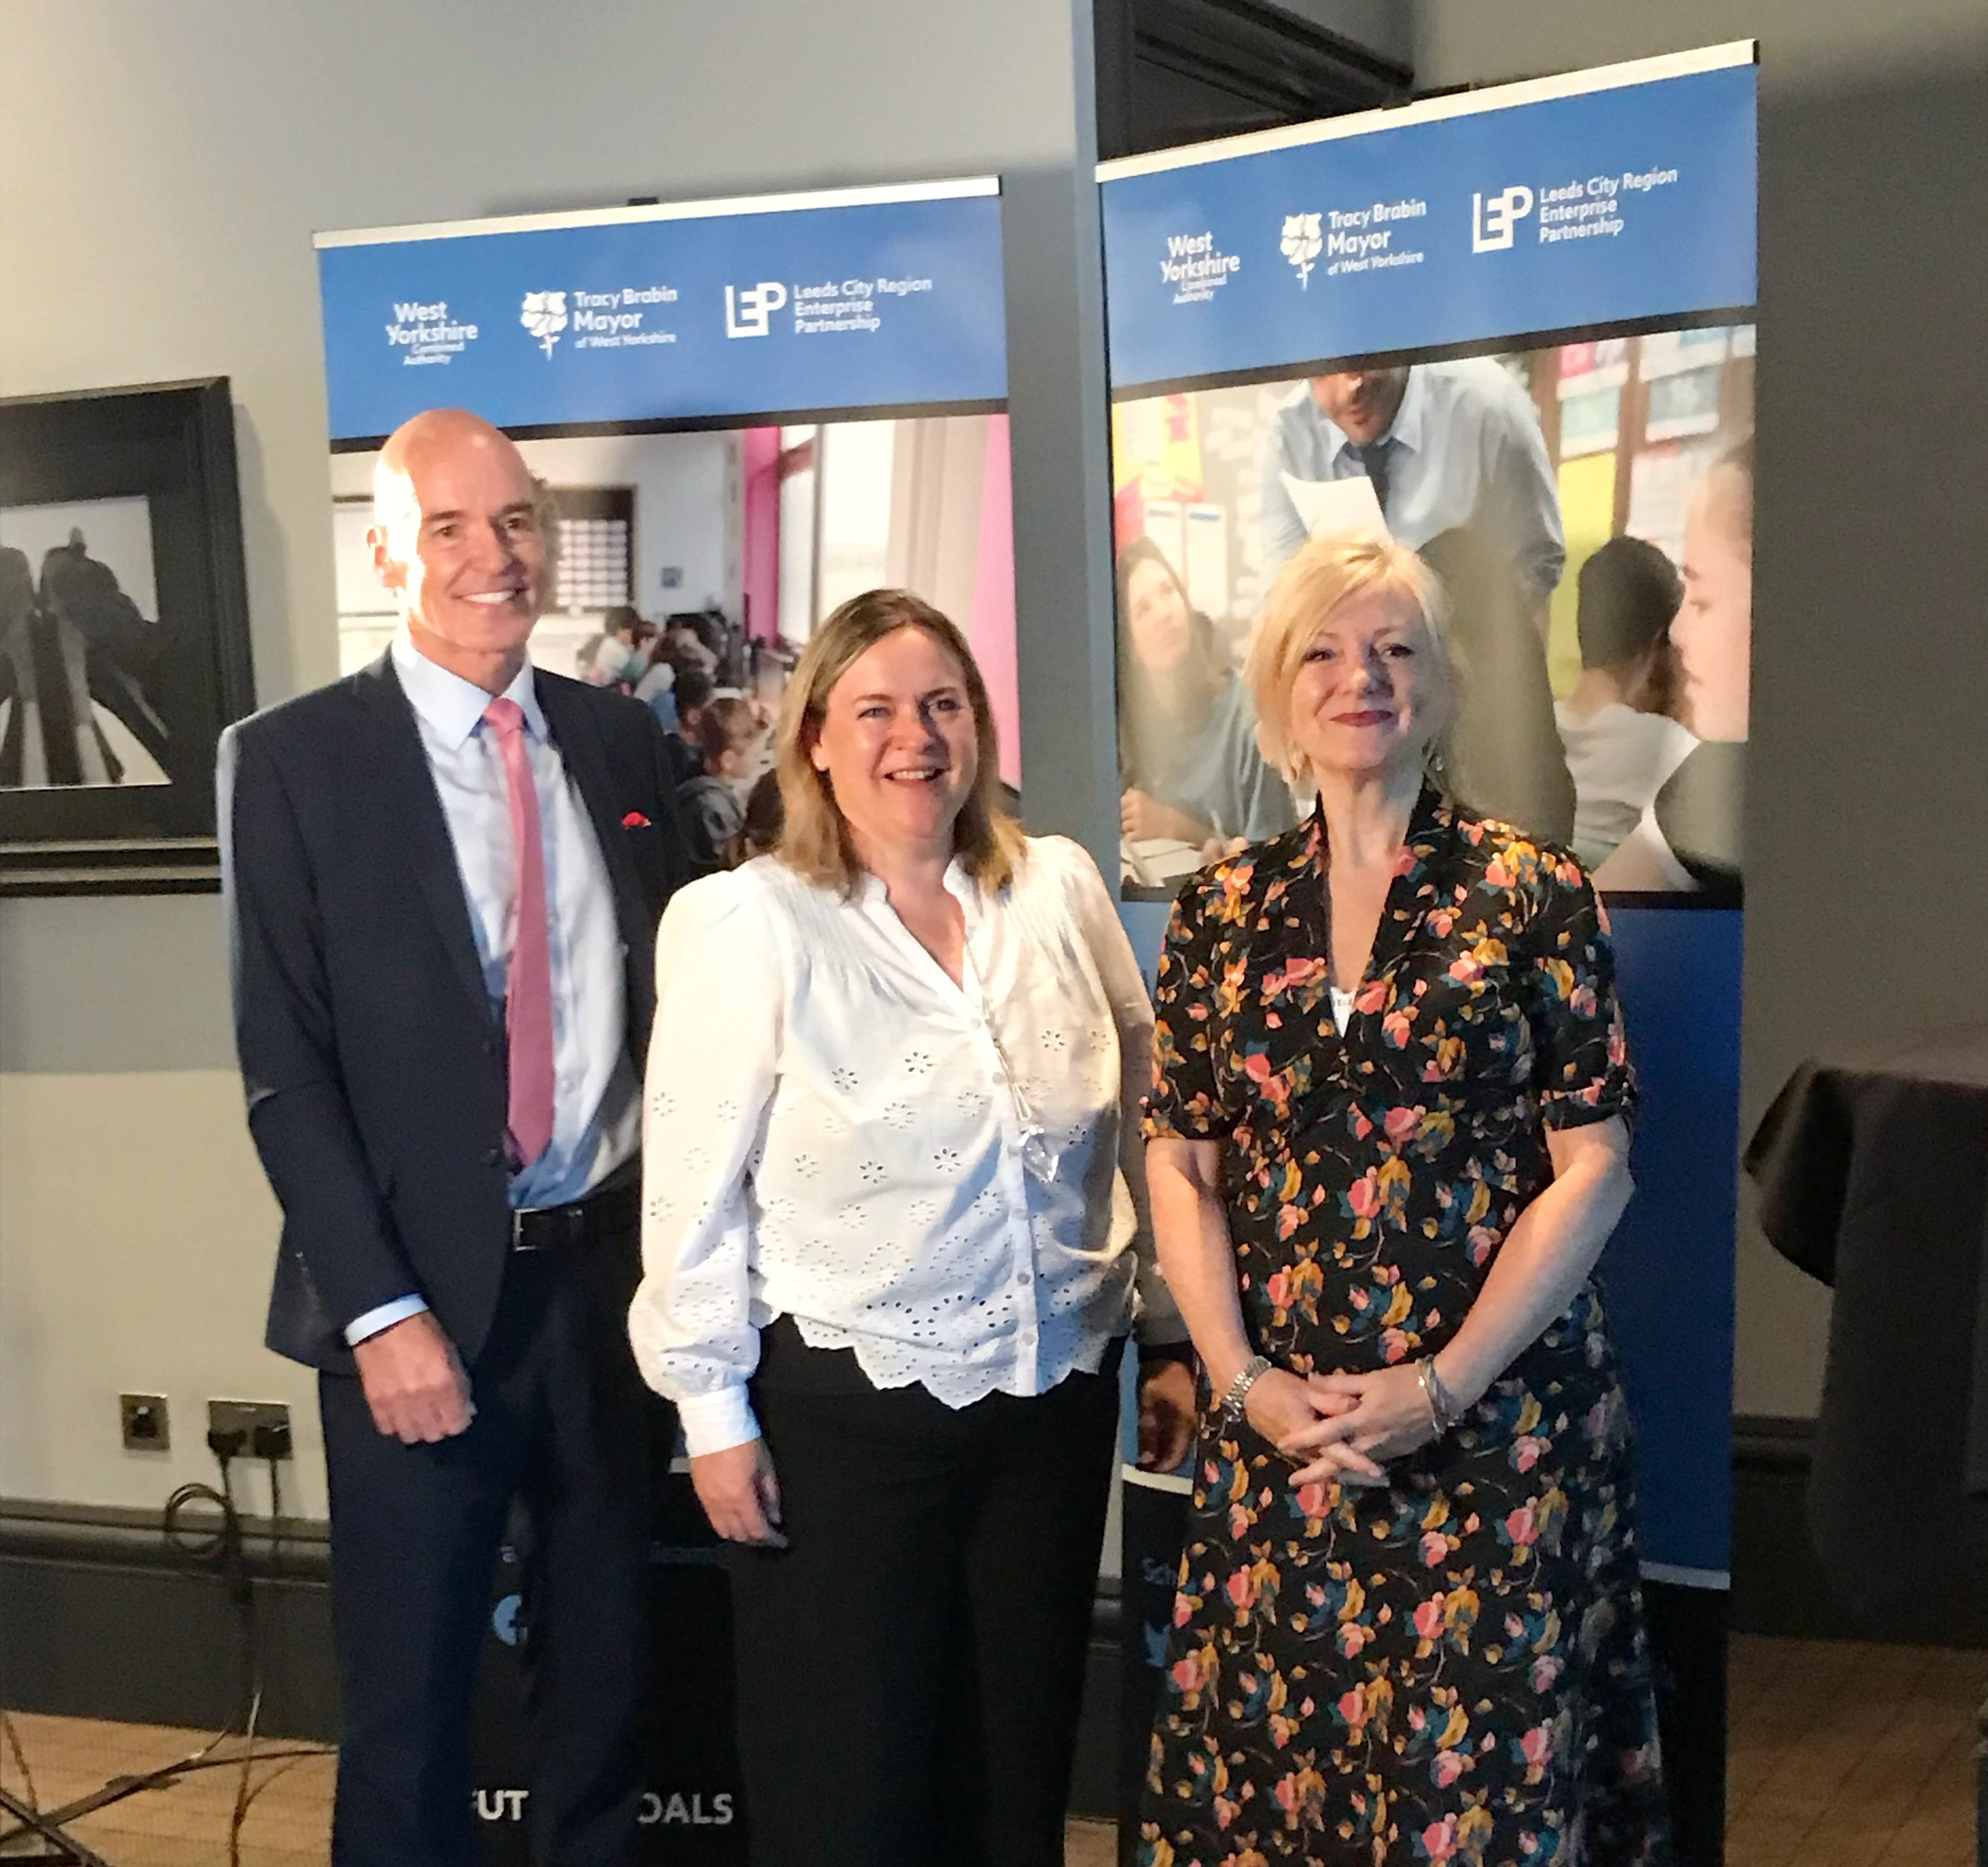 Tracy Brabin, Mayor of West Yorkshire, Nicola Hall, Careers and Enterprise Company and Brian Archer, Director of Economic Services, West Yorkshire Combined Authority